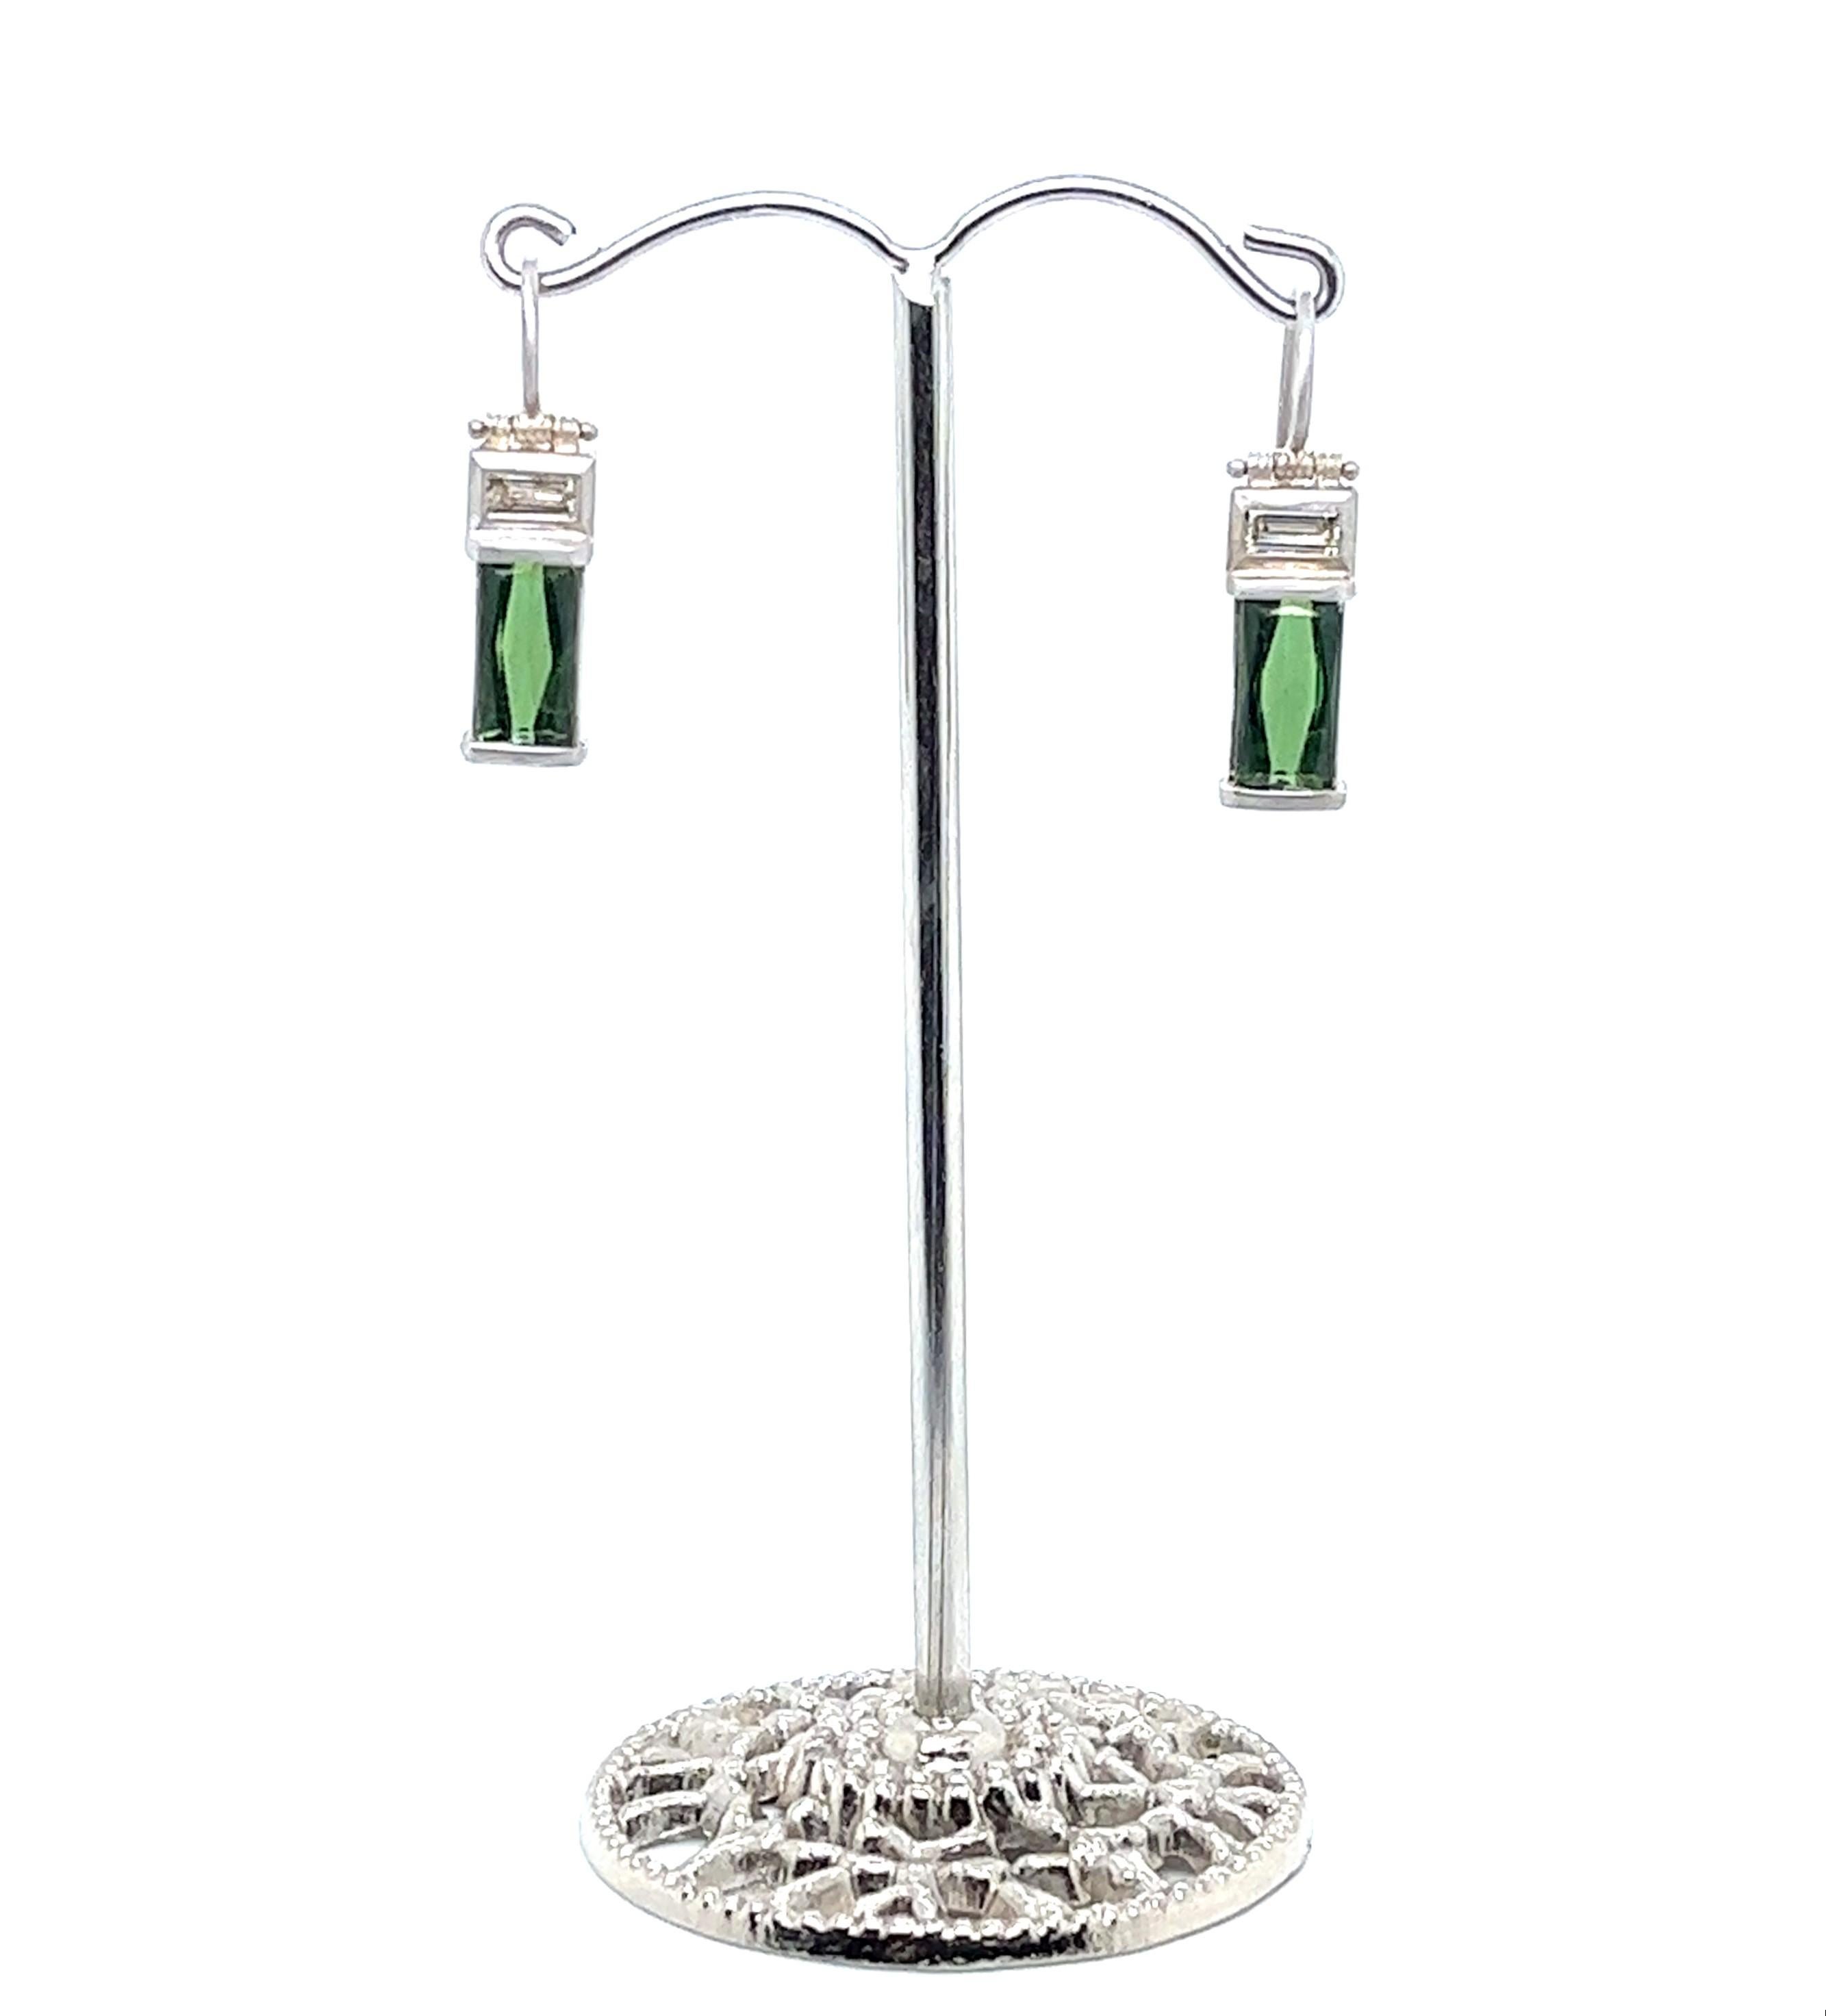 Faye Kim's one-of-a-kind 18 Karat White Gold Diamond Tourmaline Baguette Earrings are finished with hinged ear wires. The bright and beautiful twin green tourmalines paired with white diamonds evoke an Art Deco feel, yet pop against the white gold